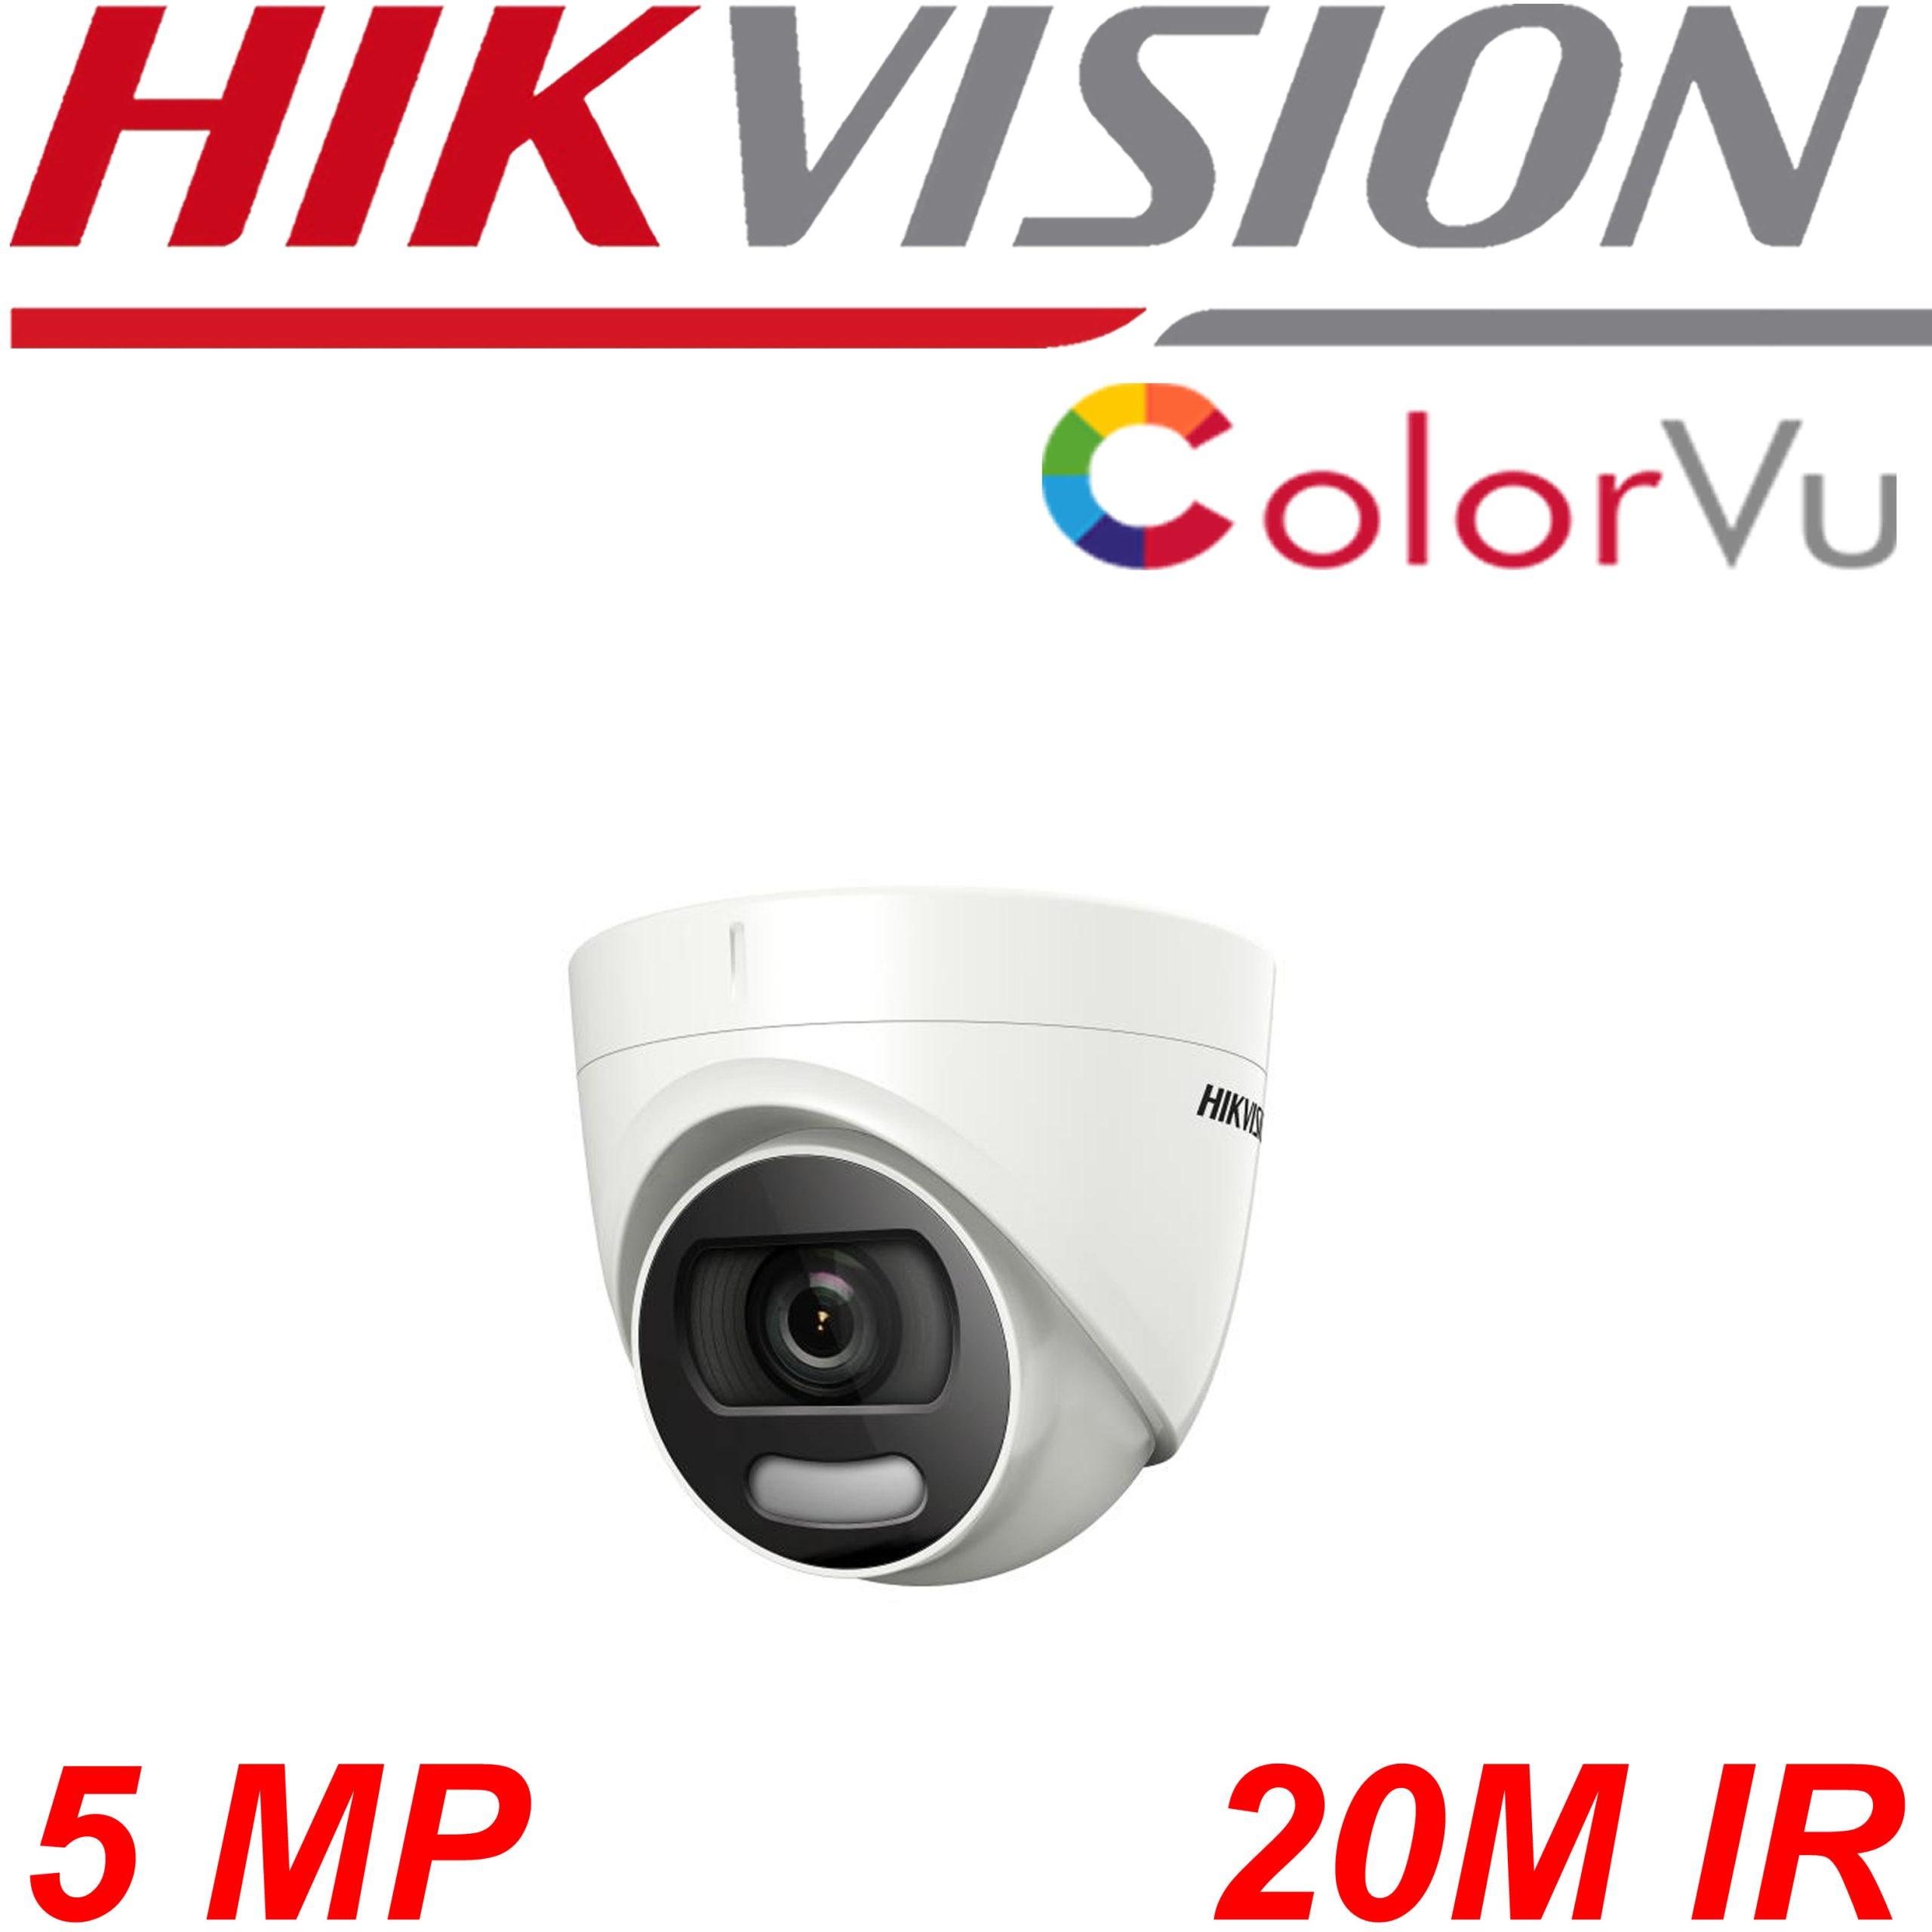 Product 5MP Hikvision DS-2CE72HFT-F ColorVu Turret 3.6 mm Wide Angle Fixed Lens 20m IR IP67 Security Camera - AAA CCTV image